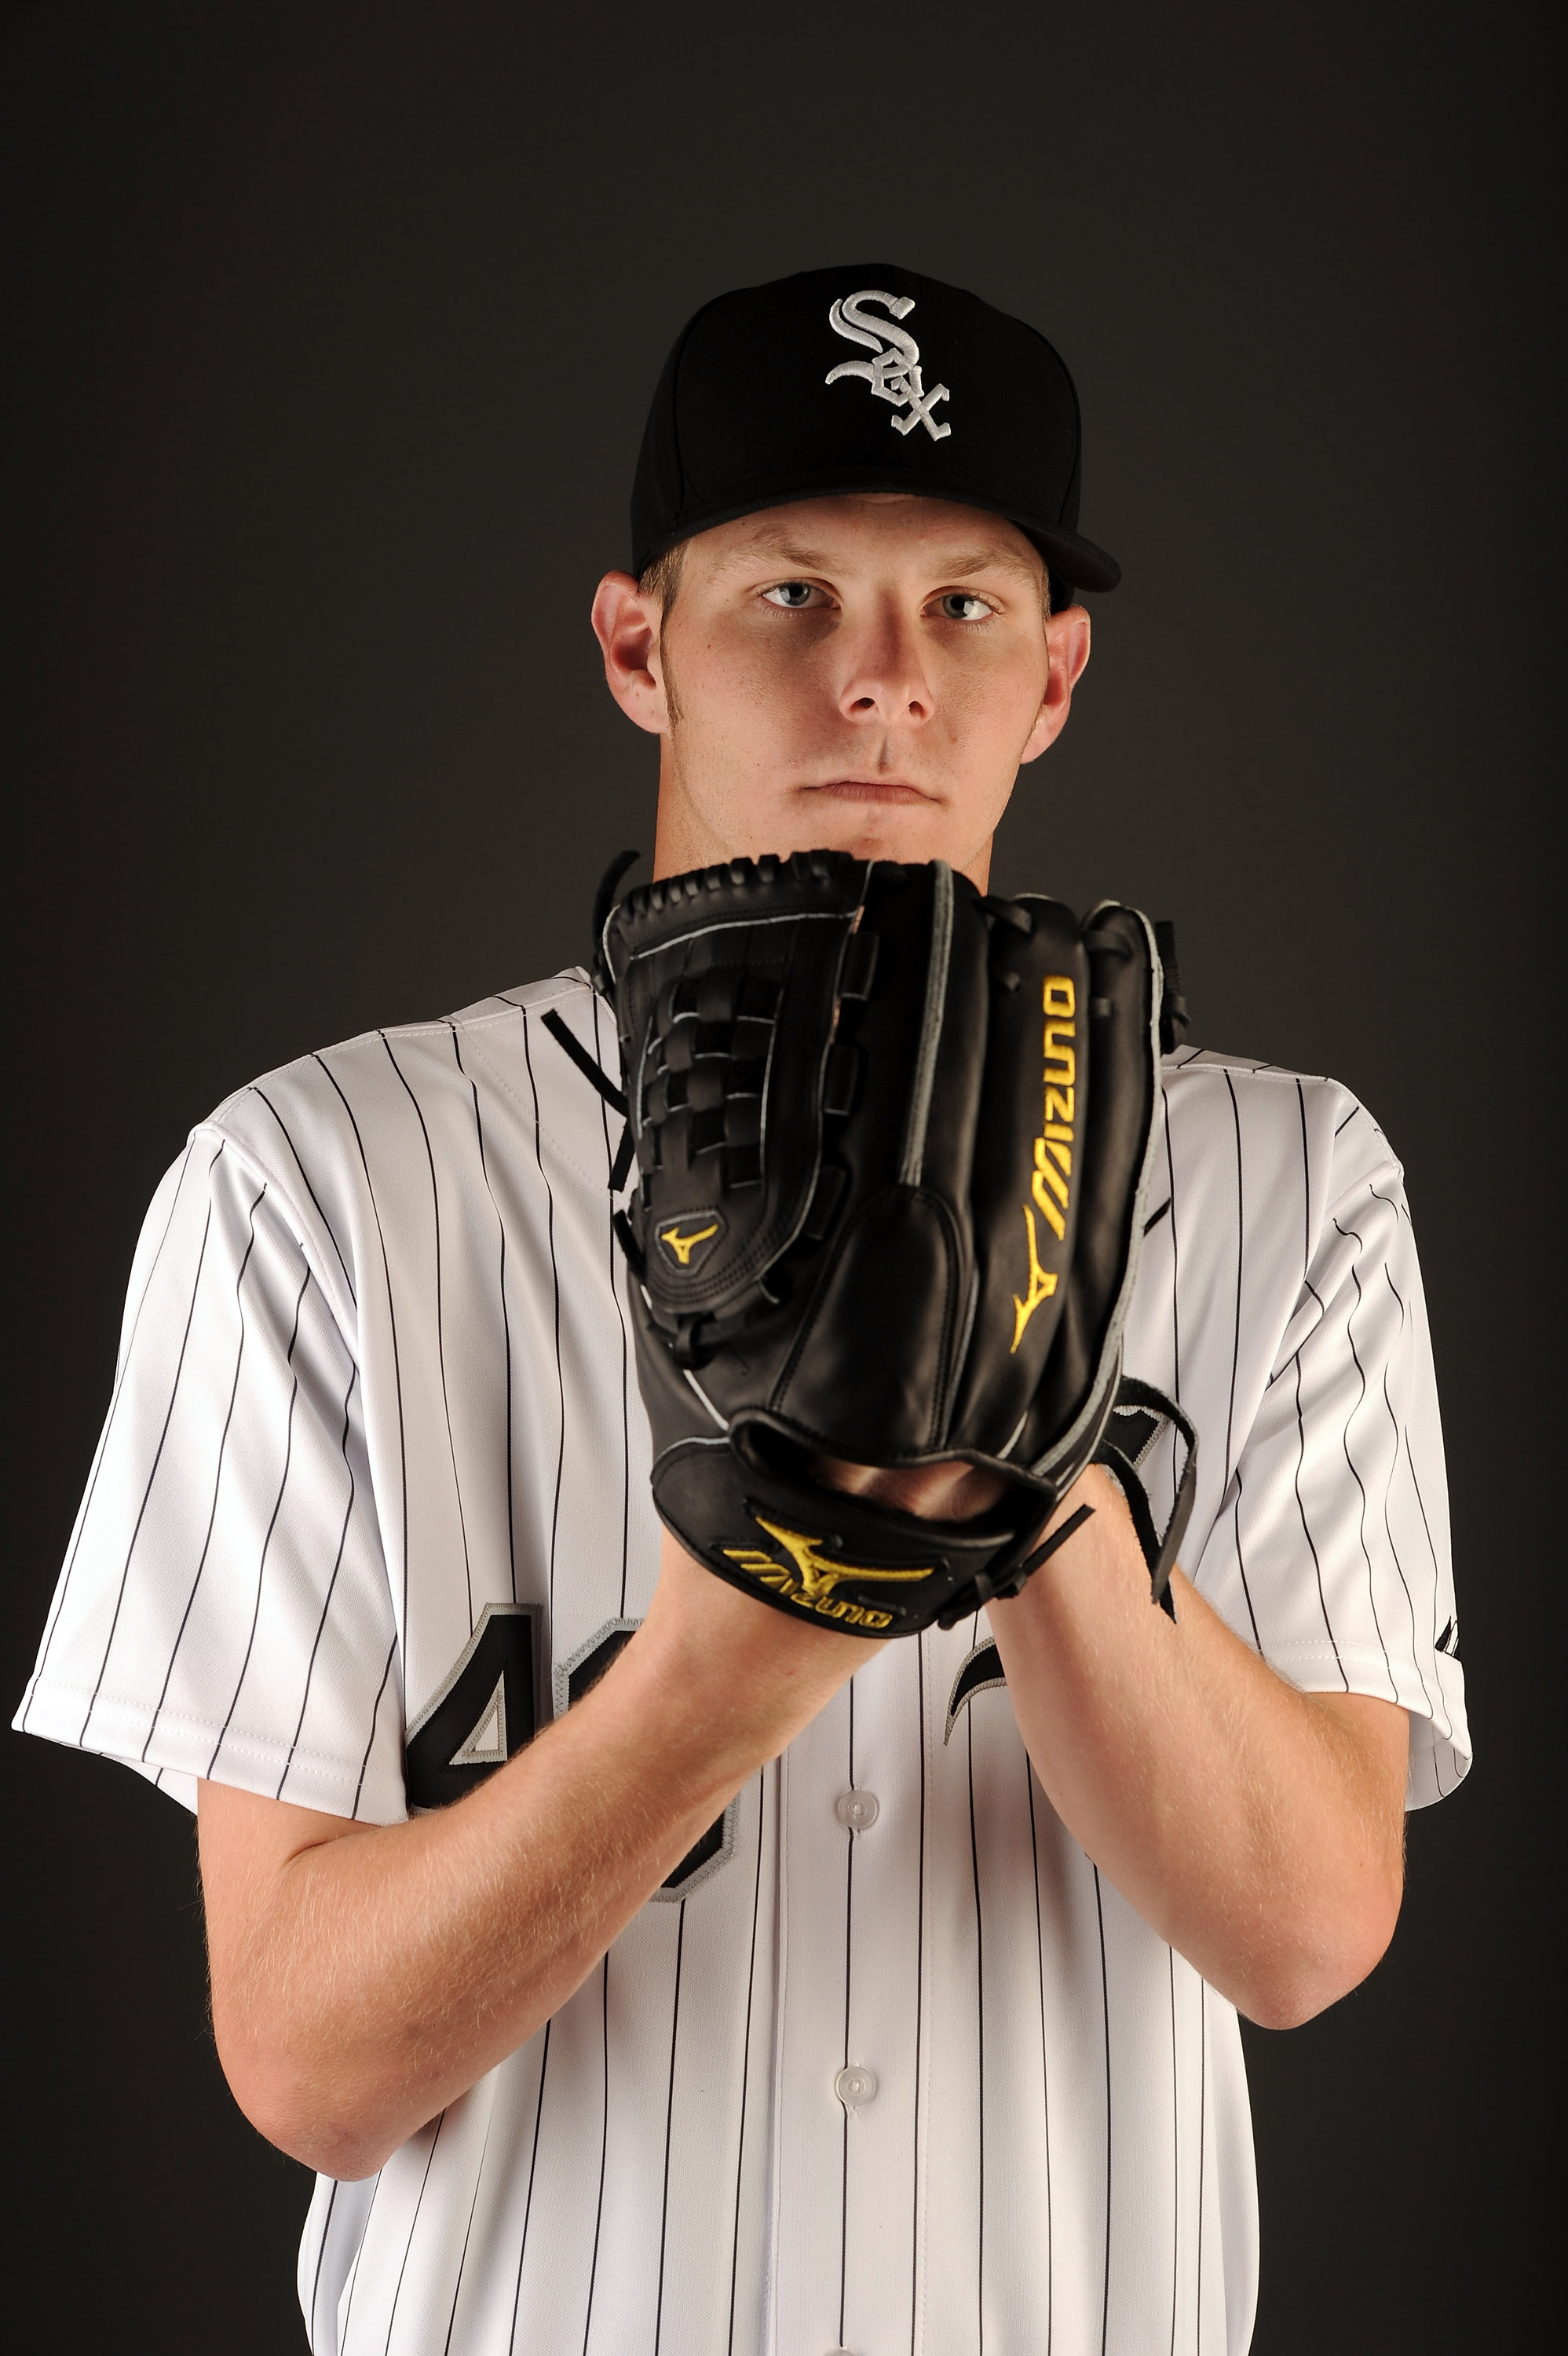 GLENDALE, AZ - FEBRUARY 26:  Chris Sale #49 of the Chicago White Sox poses for a photo on photo day at Camelback Ranch on February 26, 2011 in Glendale, Arizona.  (Photo by Harry How/Getty Images)